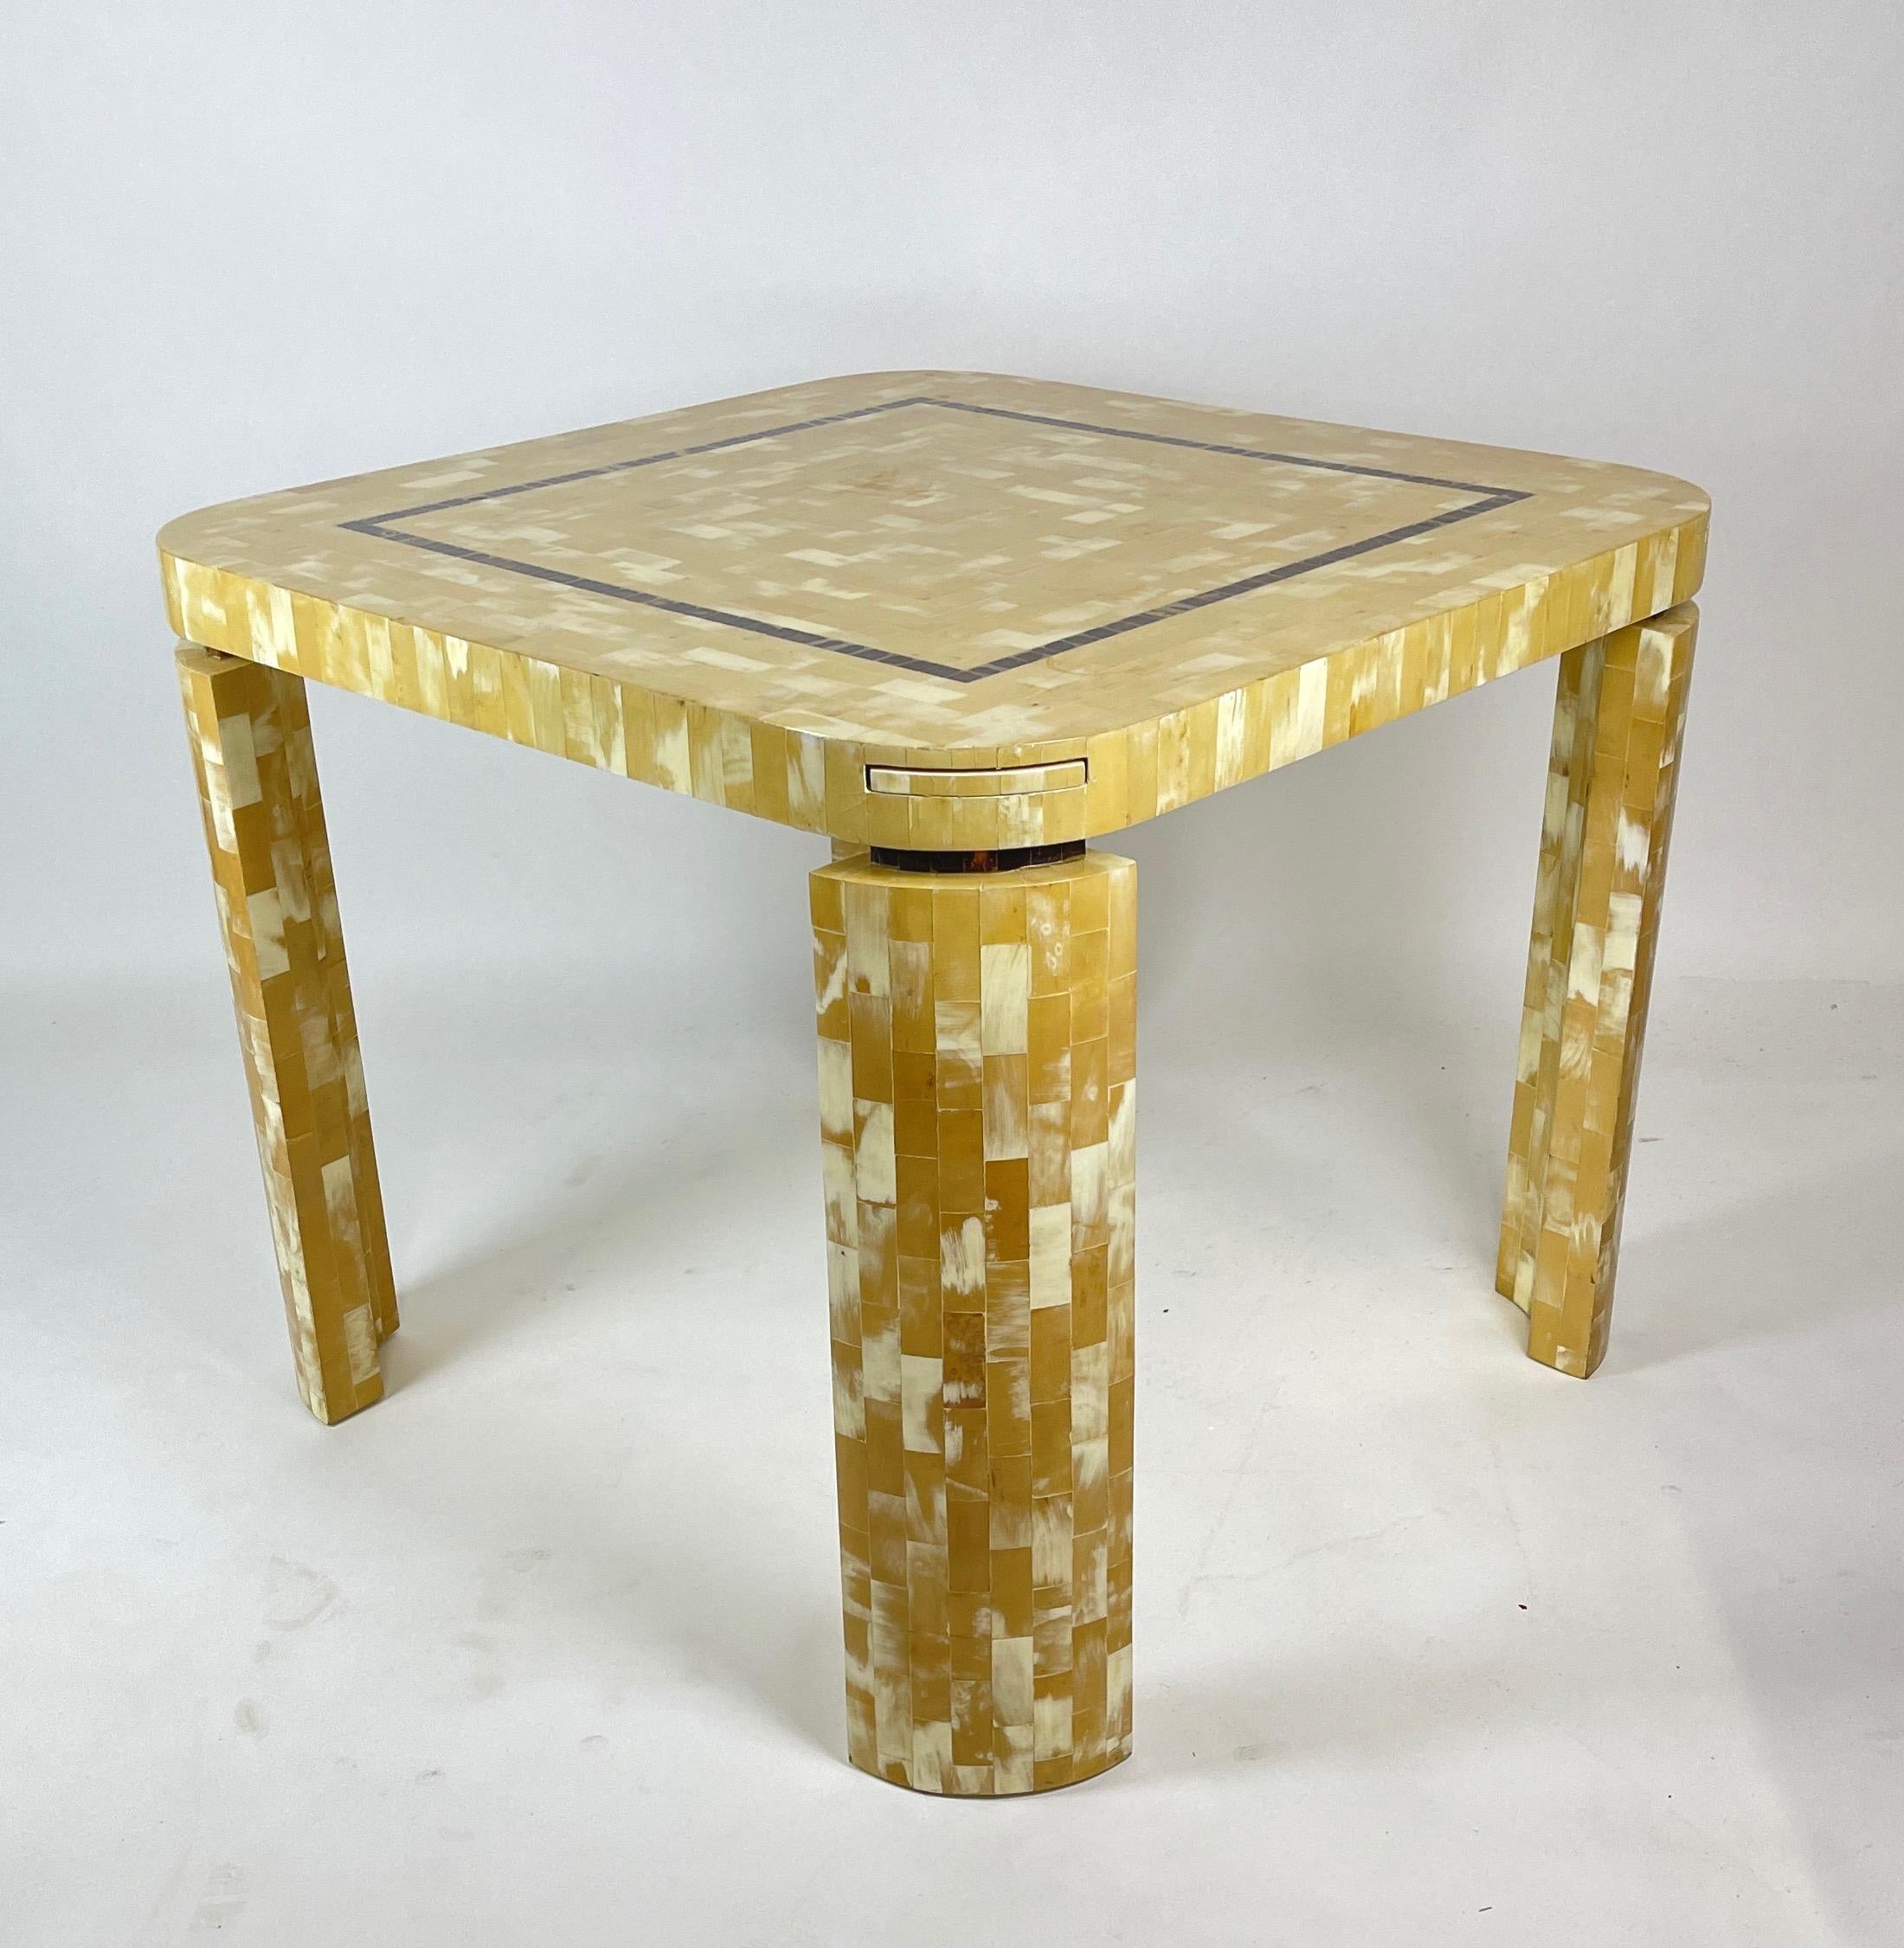 Late 20th Century Tesselated Bone Square Game Table by Enrique Garcel Patchwork, Bogota, Columbia